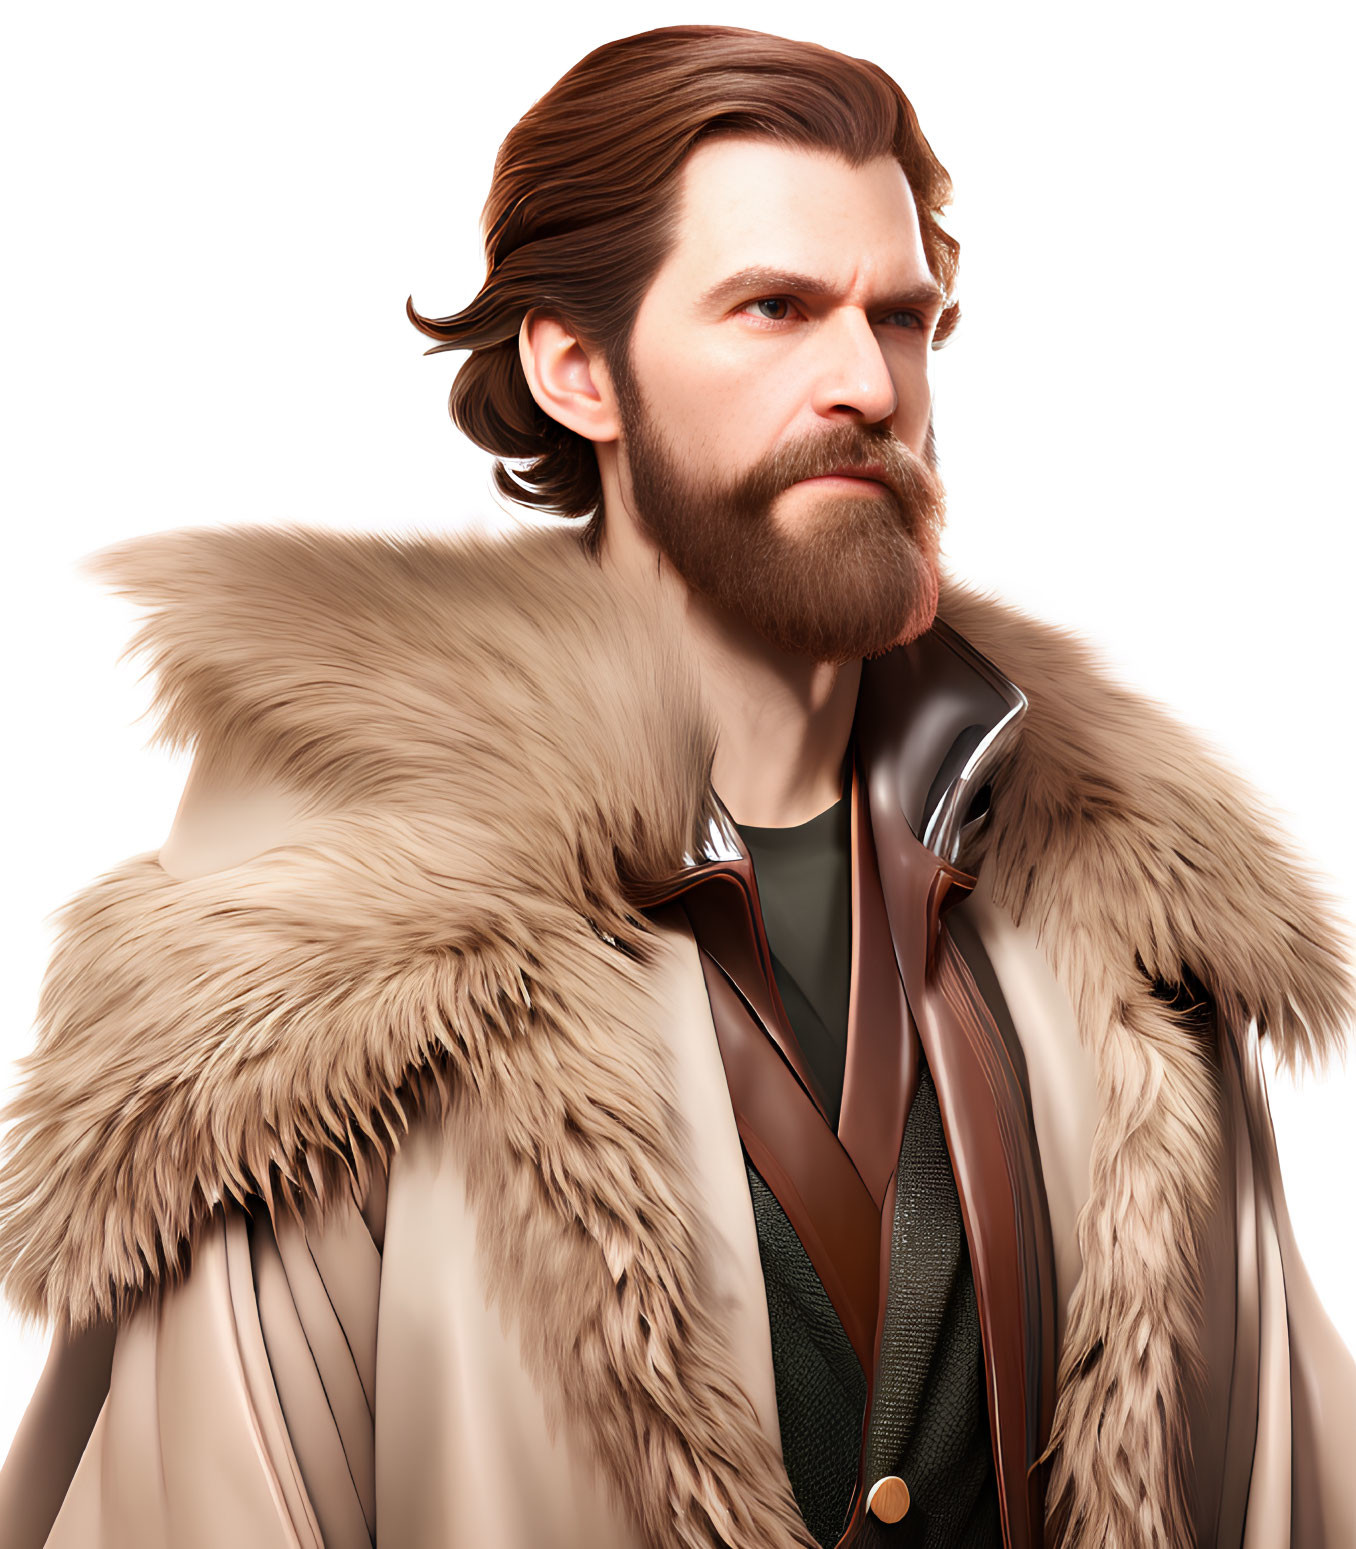 Man with Beard in Luxurious Fur-Collared Coat and Styled Hair